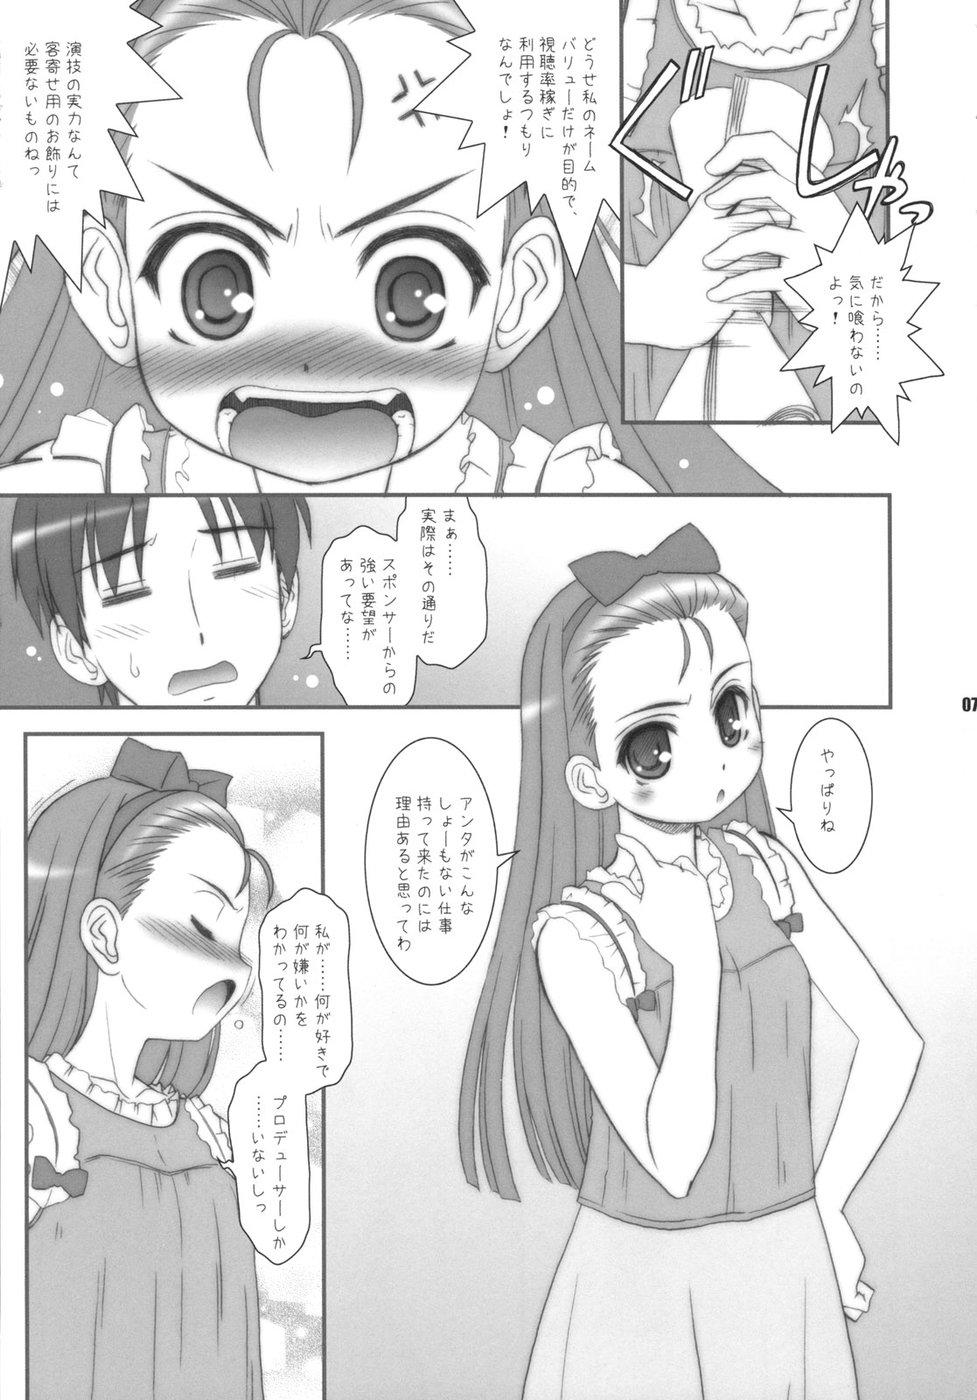 Perrito 14 - The idolmaster Facesitting - Page 7